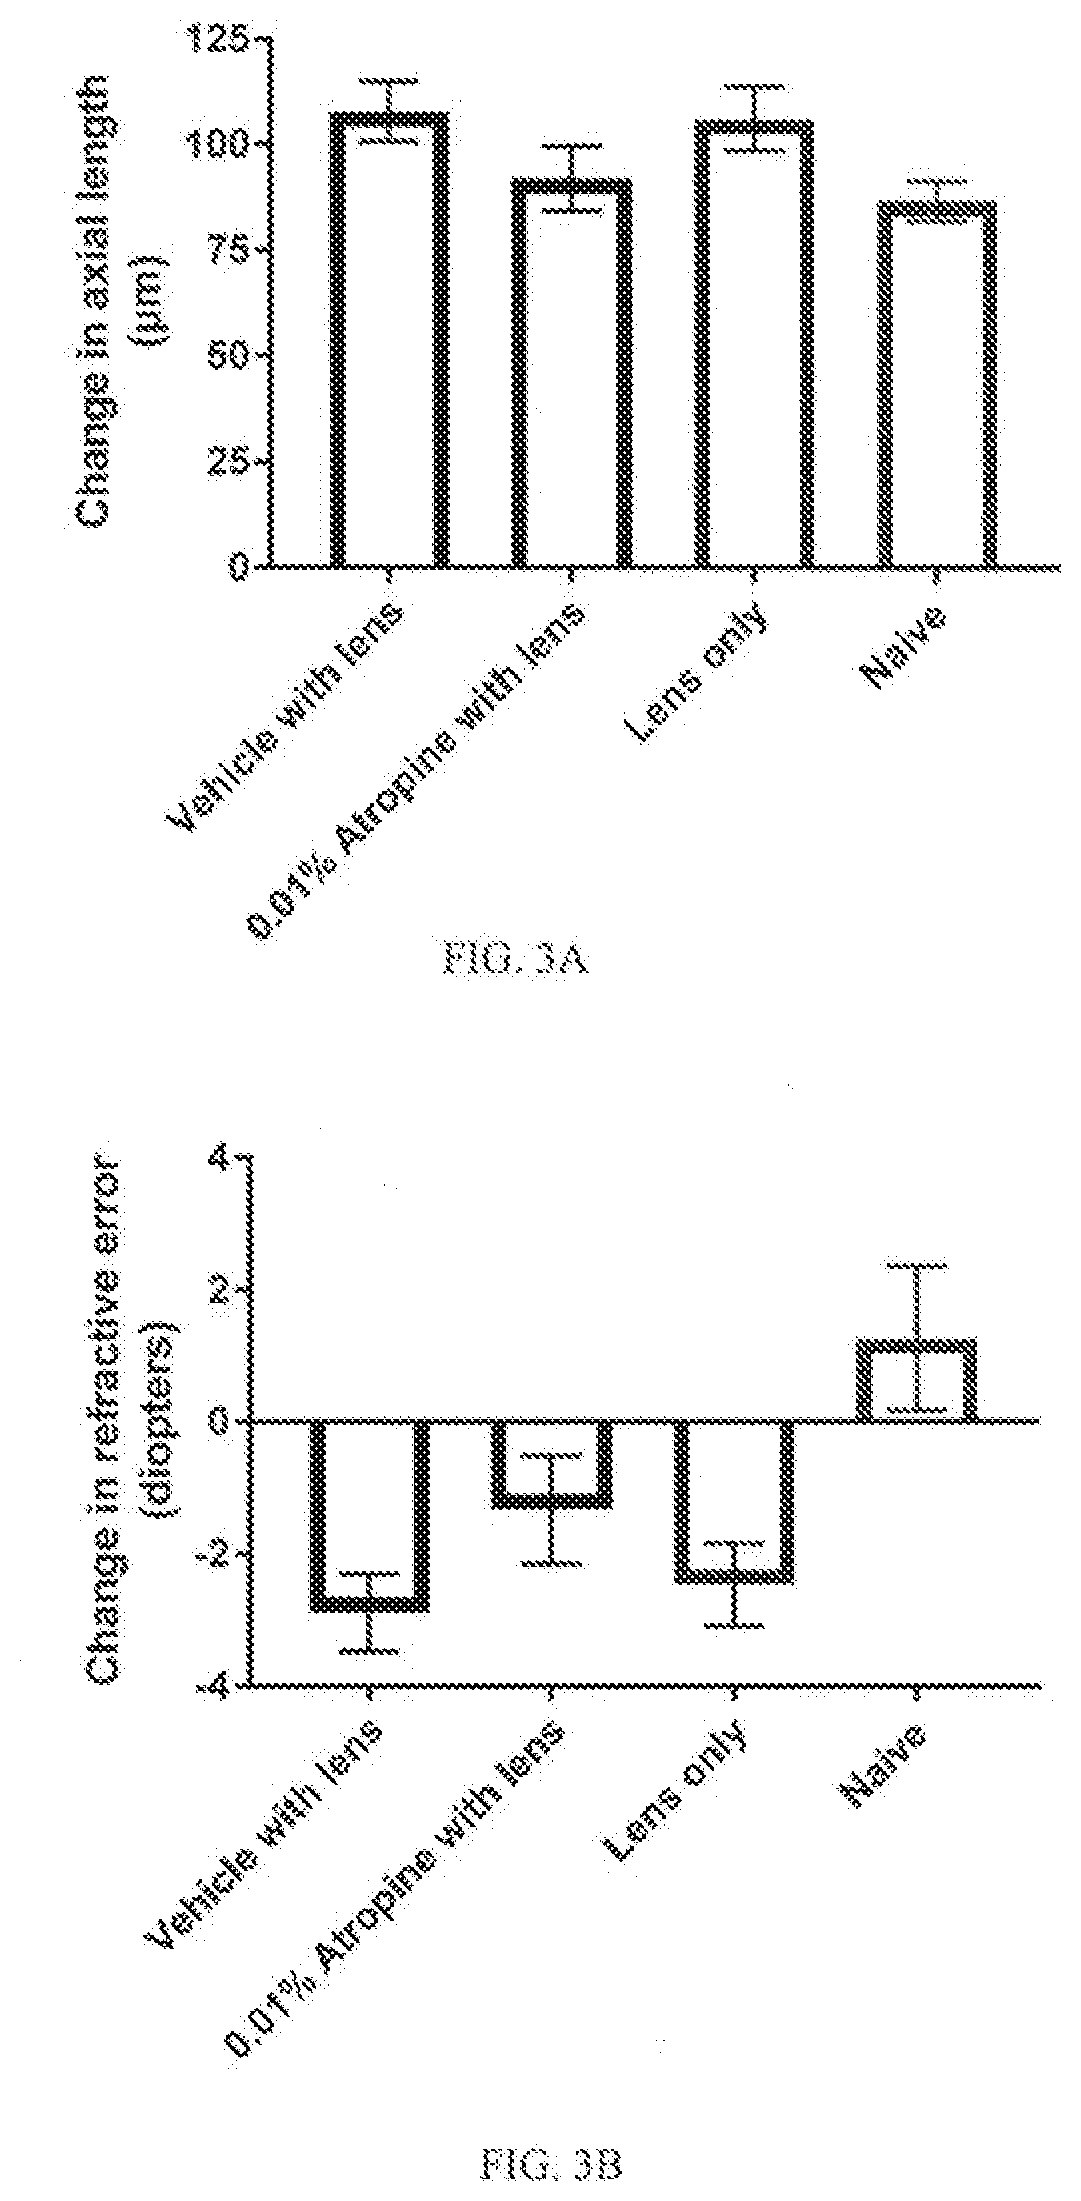 Composition and method for preventing or delaying onset of myopia comprising atropine